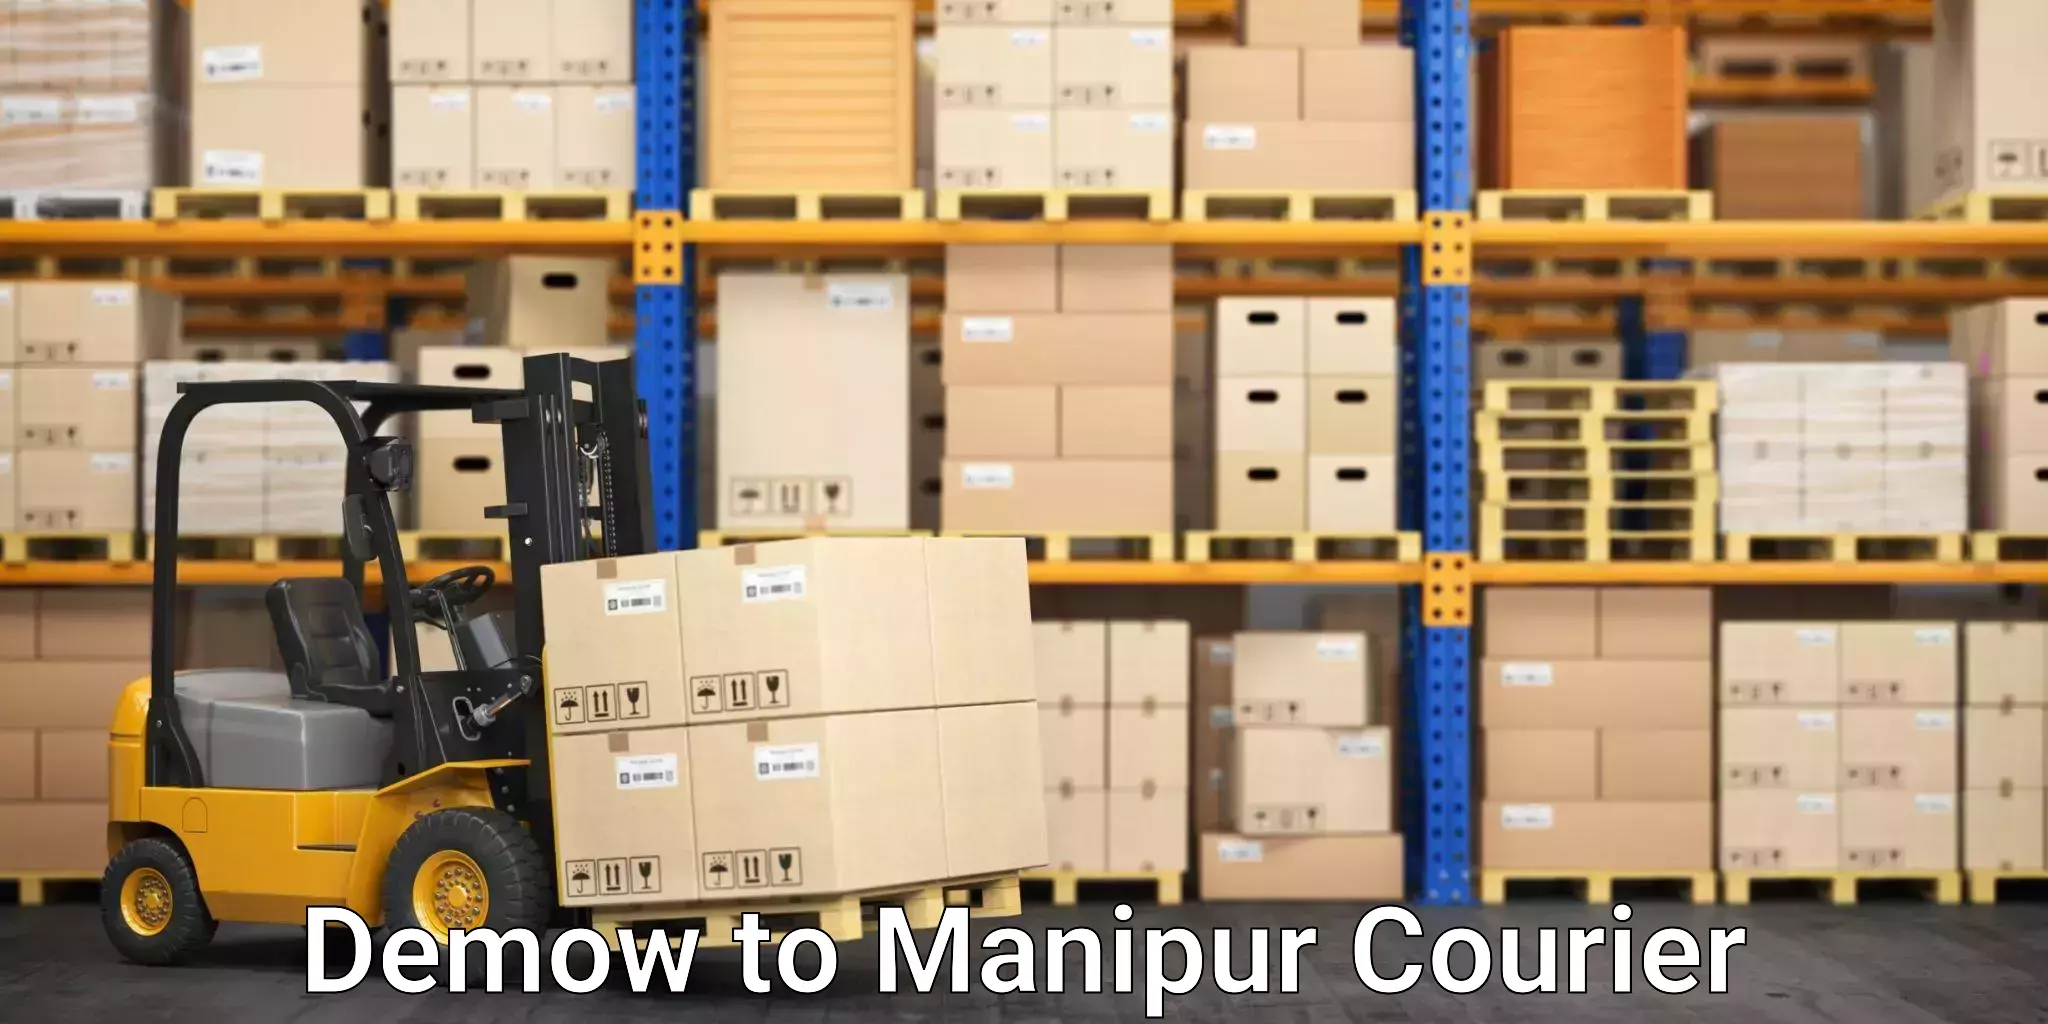 Courier service partnerships Demow to Manipur